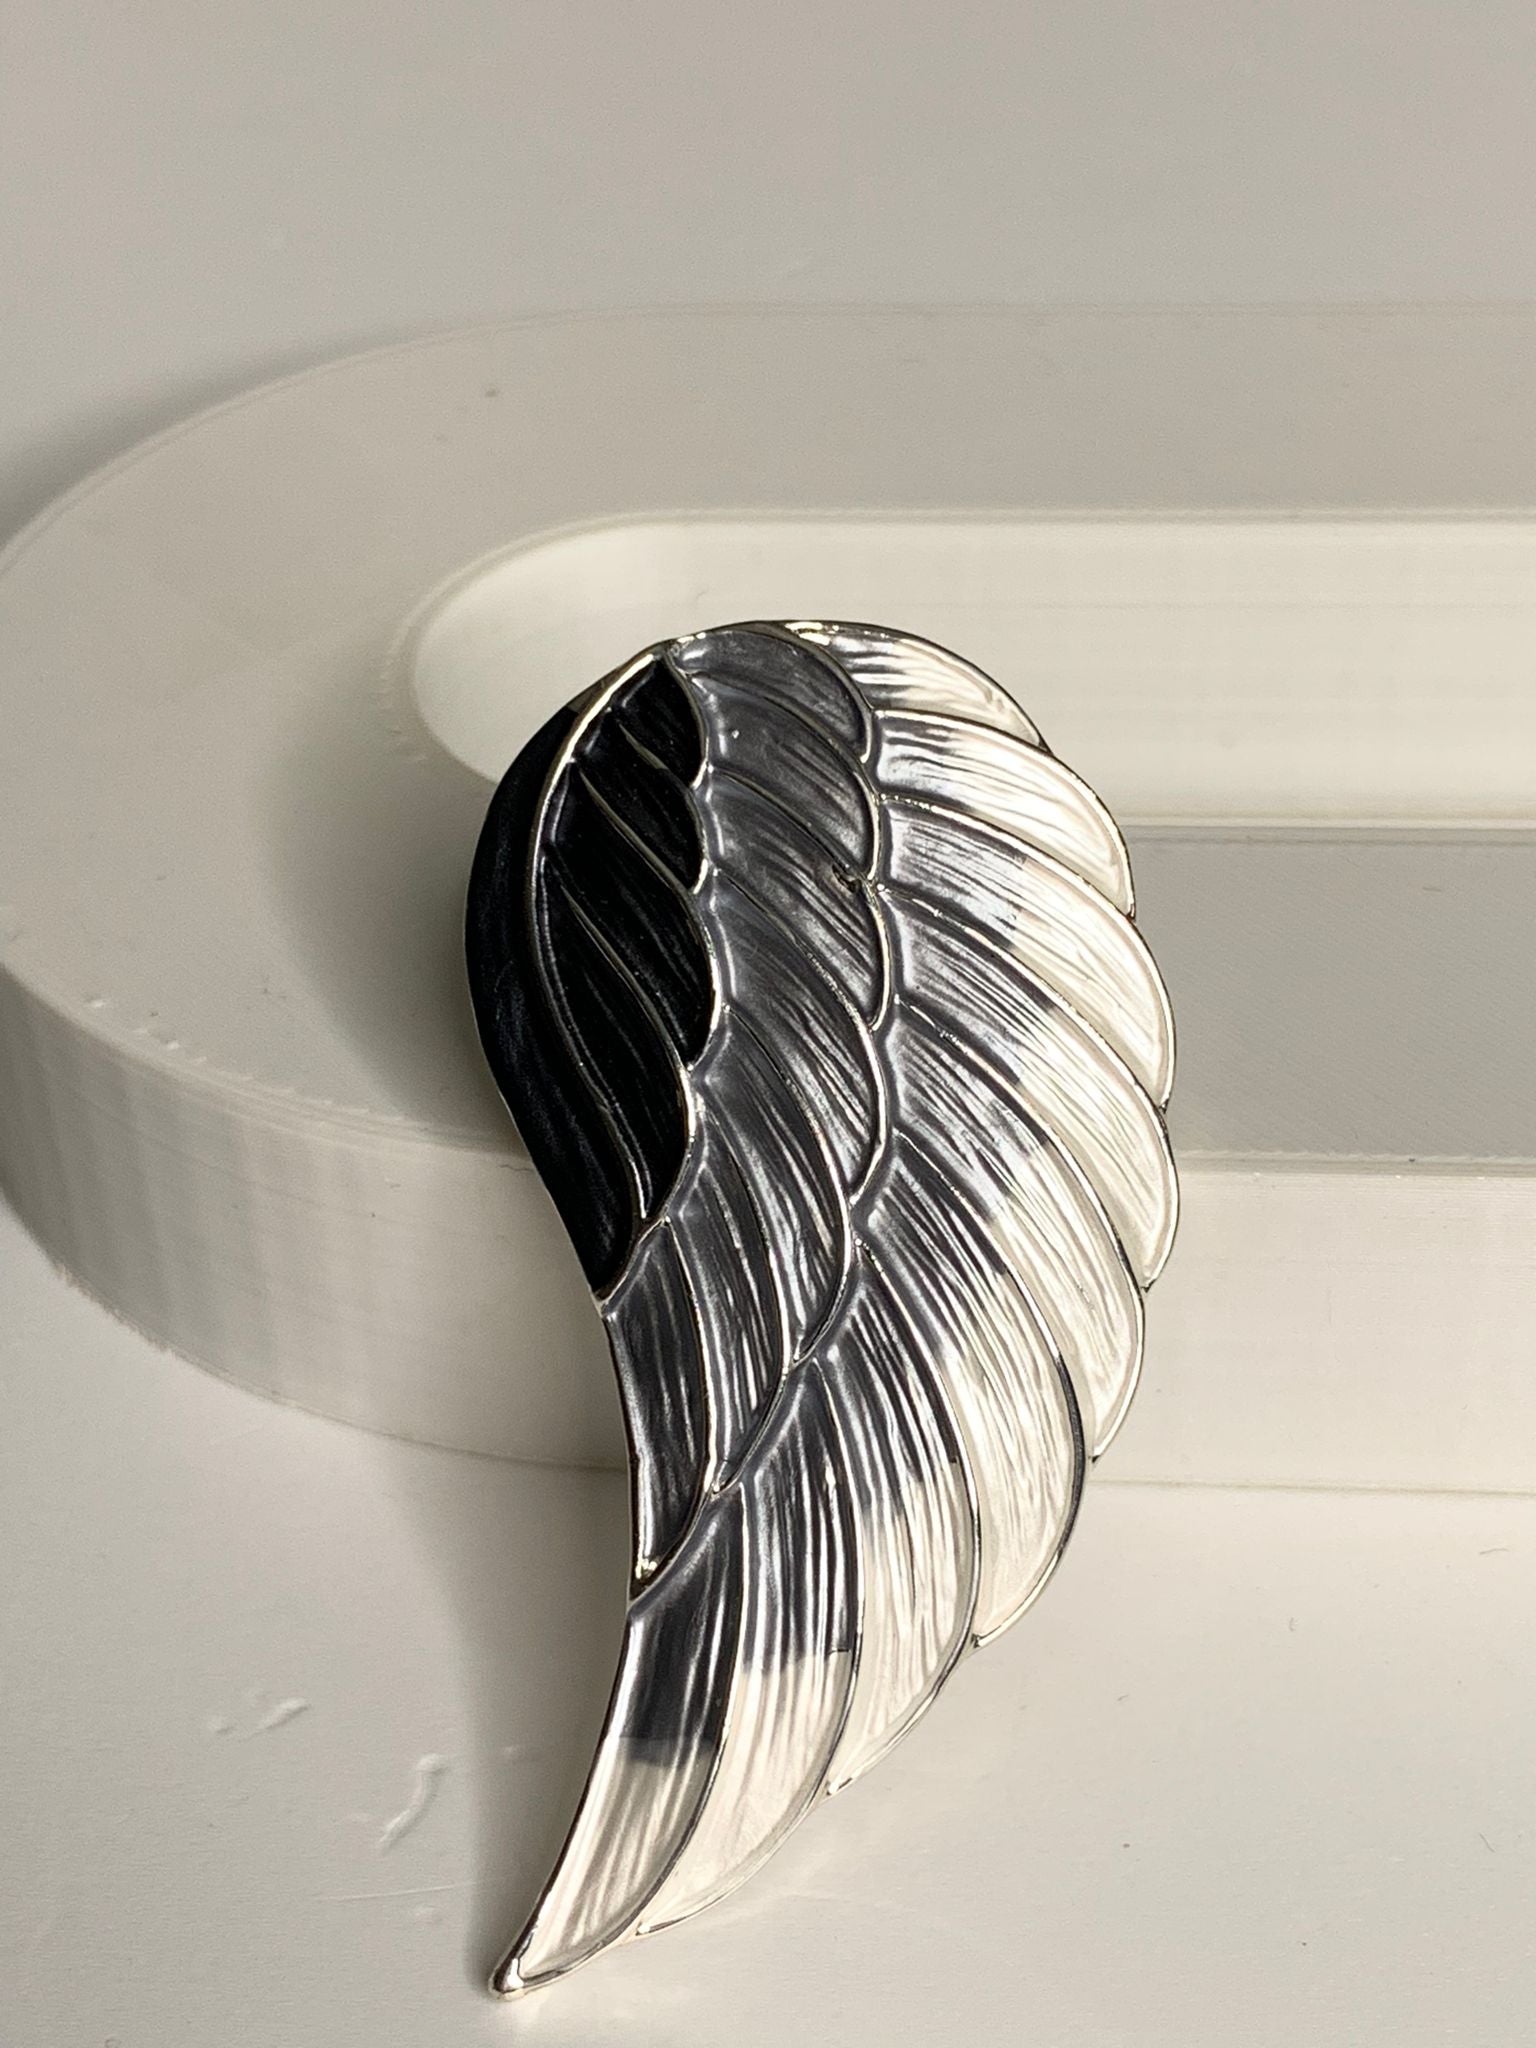 Magnetic brooch & scarf clip - 'angel wing' design in shades of shiny silver, matte black, matte grey and matte white